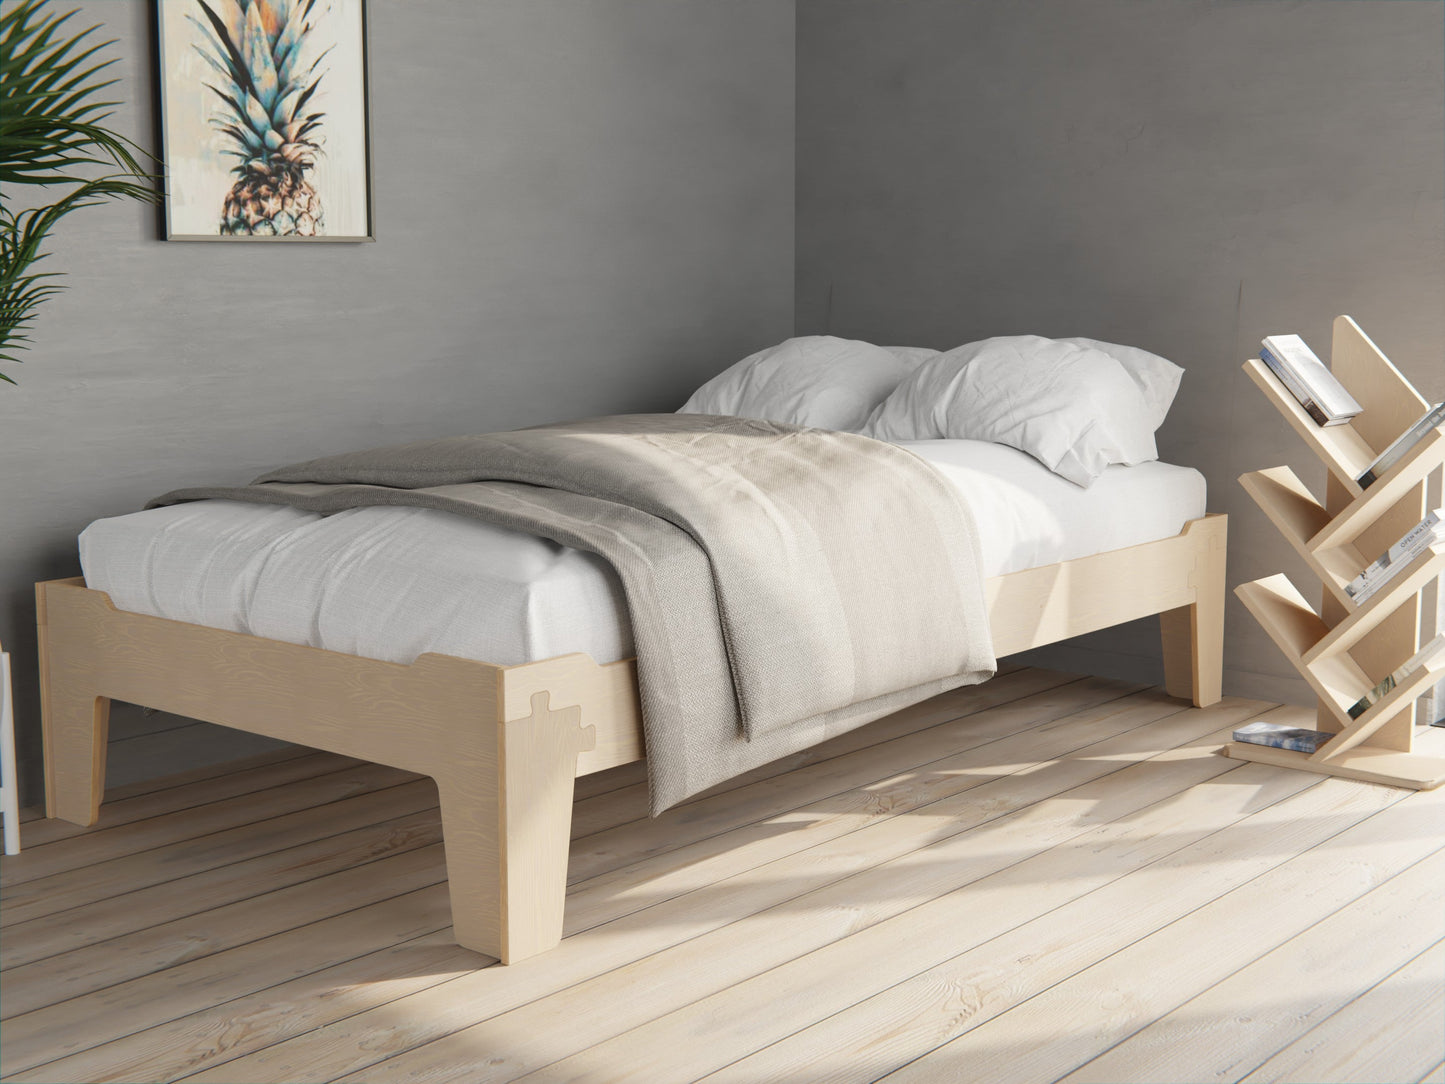 Flippable low bed frame from wood for kids and adults